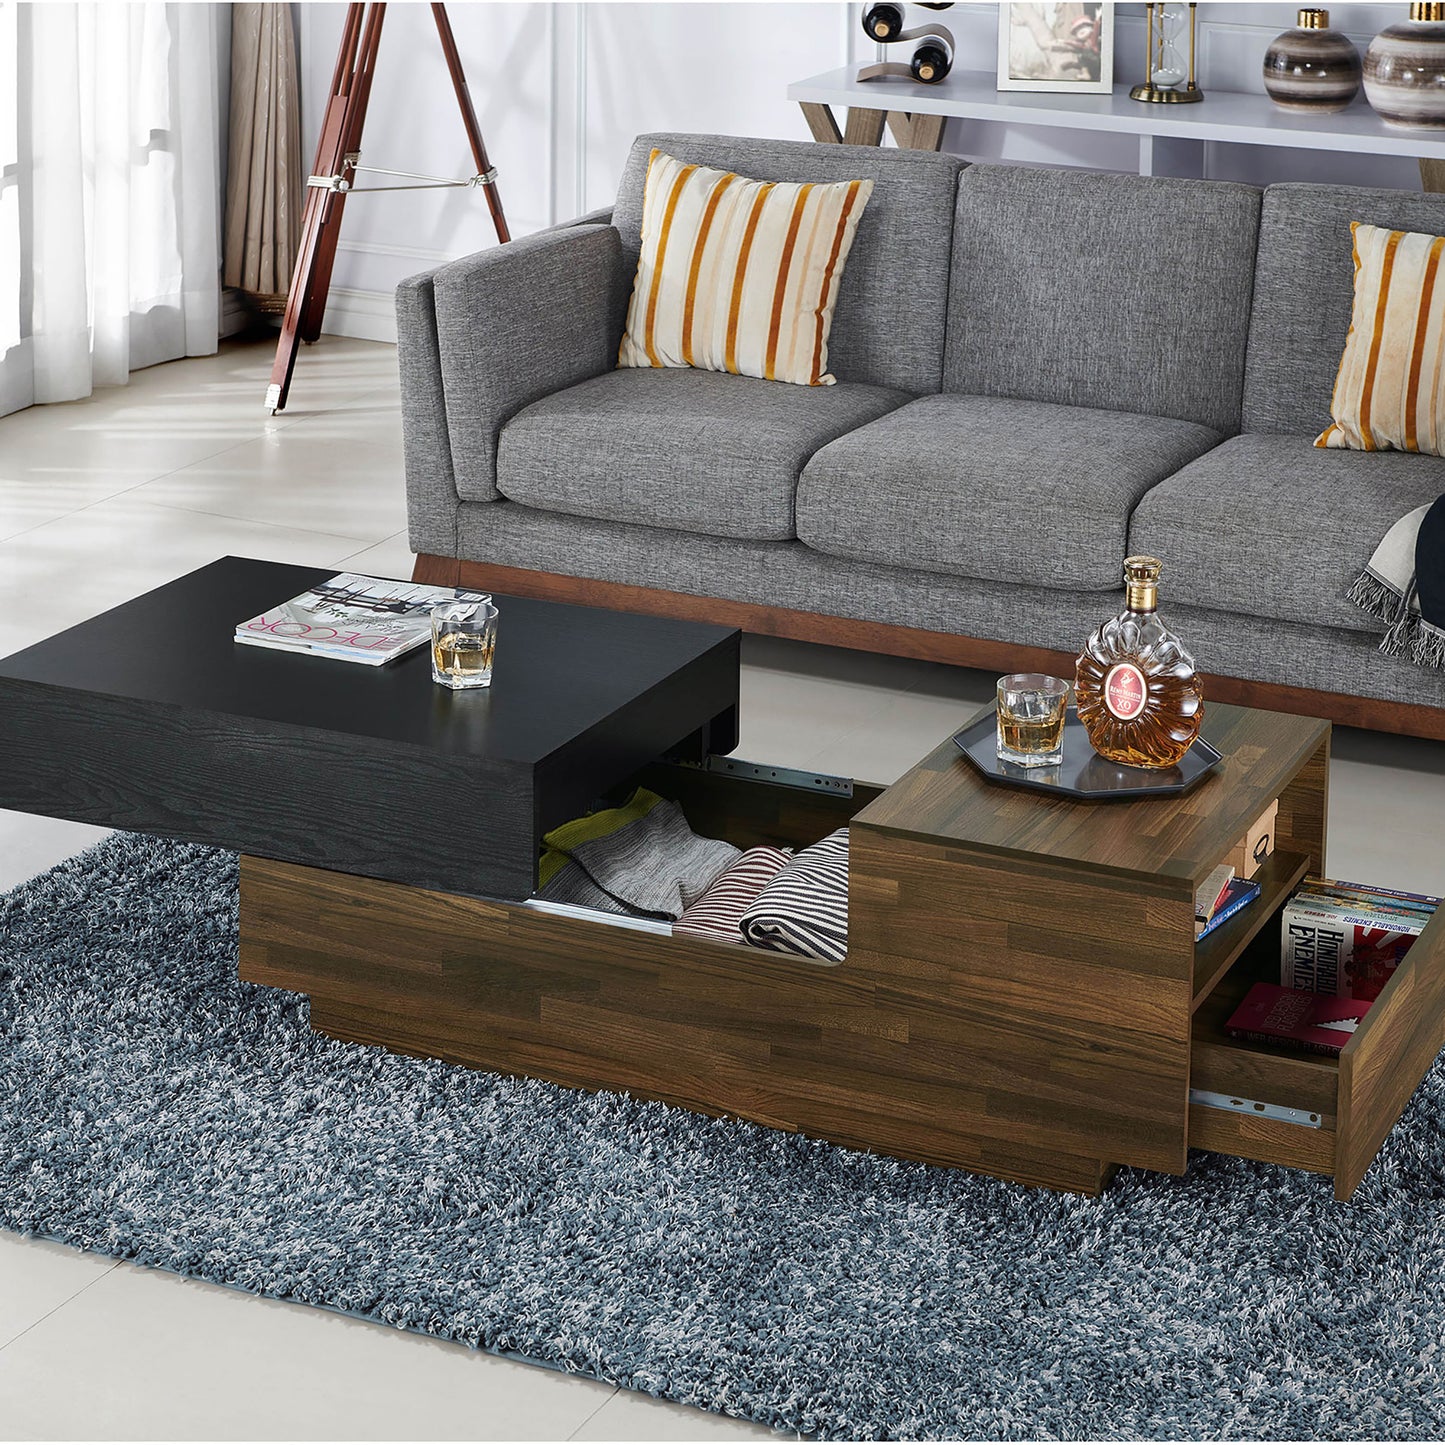 Left angled contemporary light hickory and black sliding top one-drawer coffee table with top and drawer open in a living room with accessories